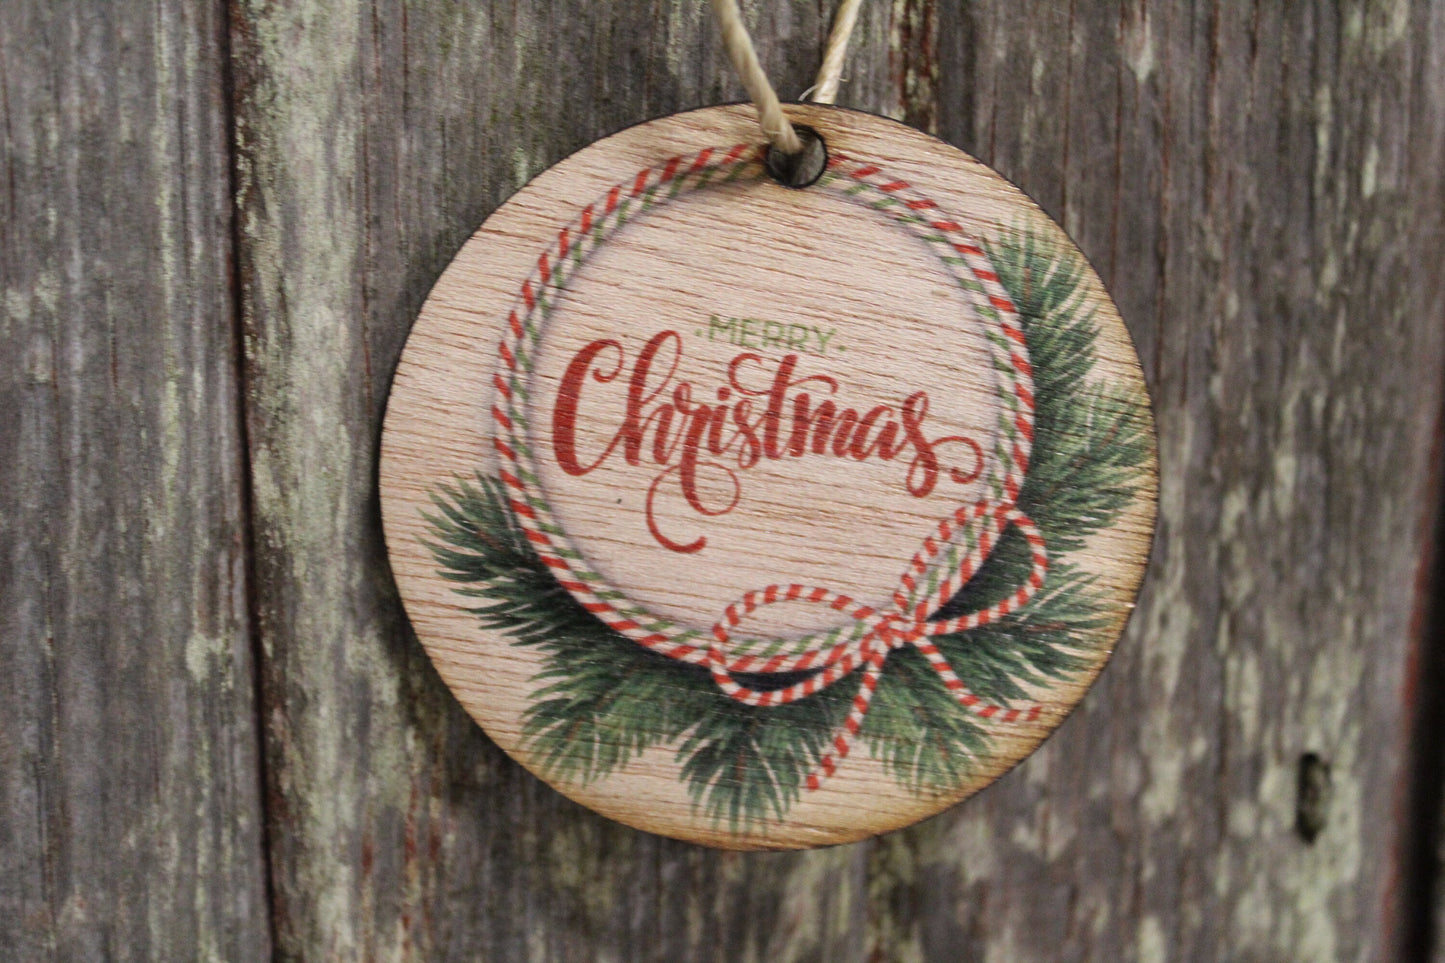 Ornament Merry Christmas Evergreen Wreath Red Green Pine Wood Wall Hanging Tree Rustic Farmhouse Wood Ribbon Script Text